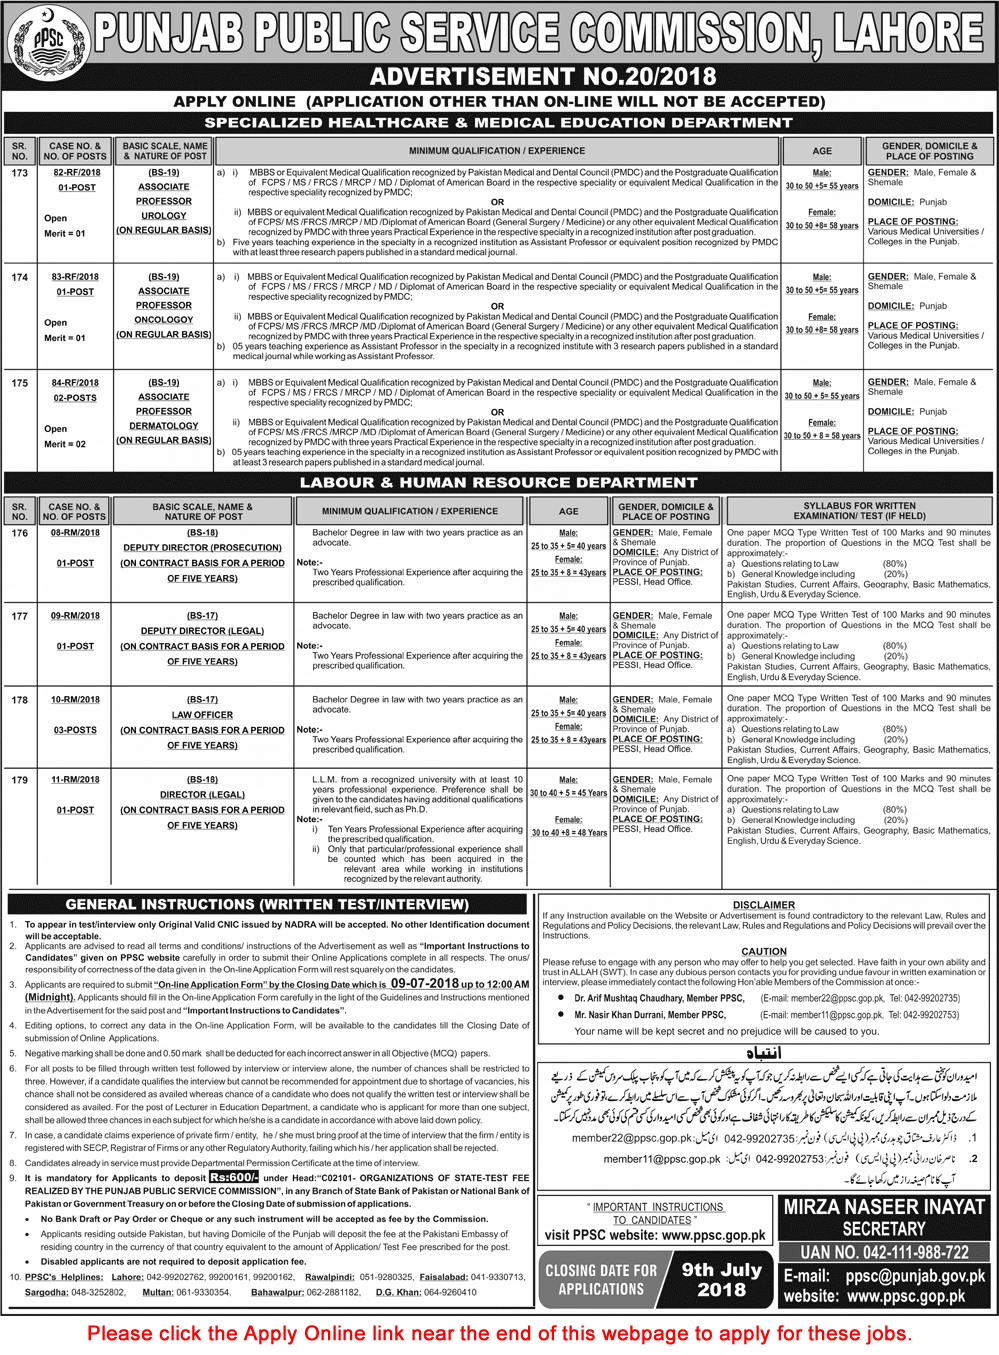 PPSC Jobs June 2018 Apply Online Consolidated Advertisement No 20/2018 Latest